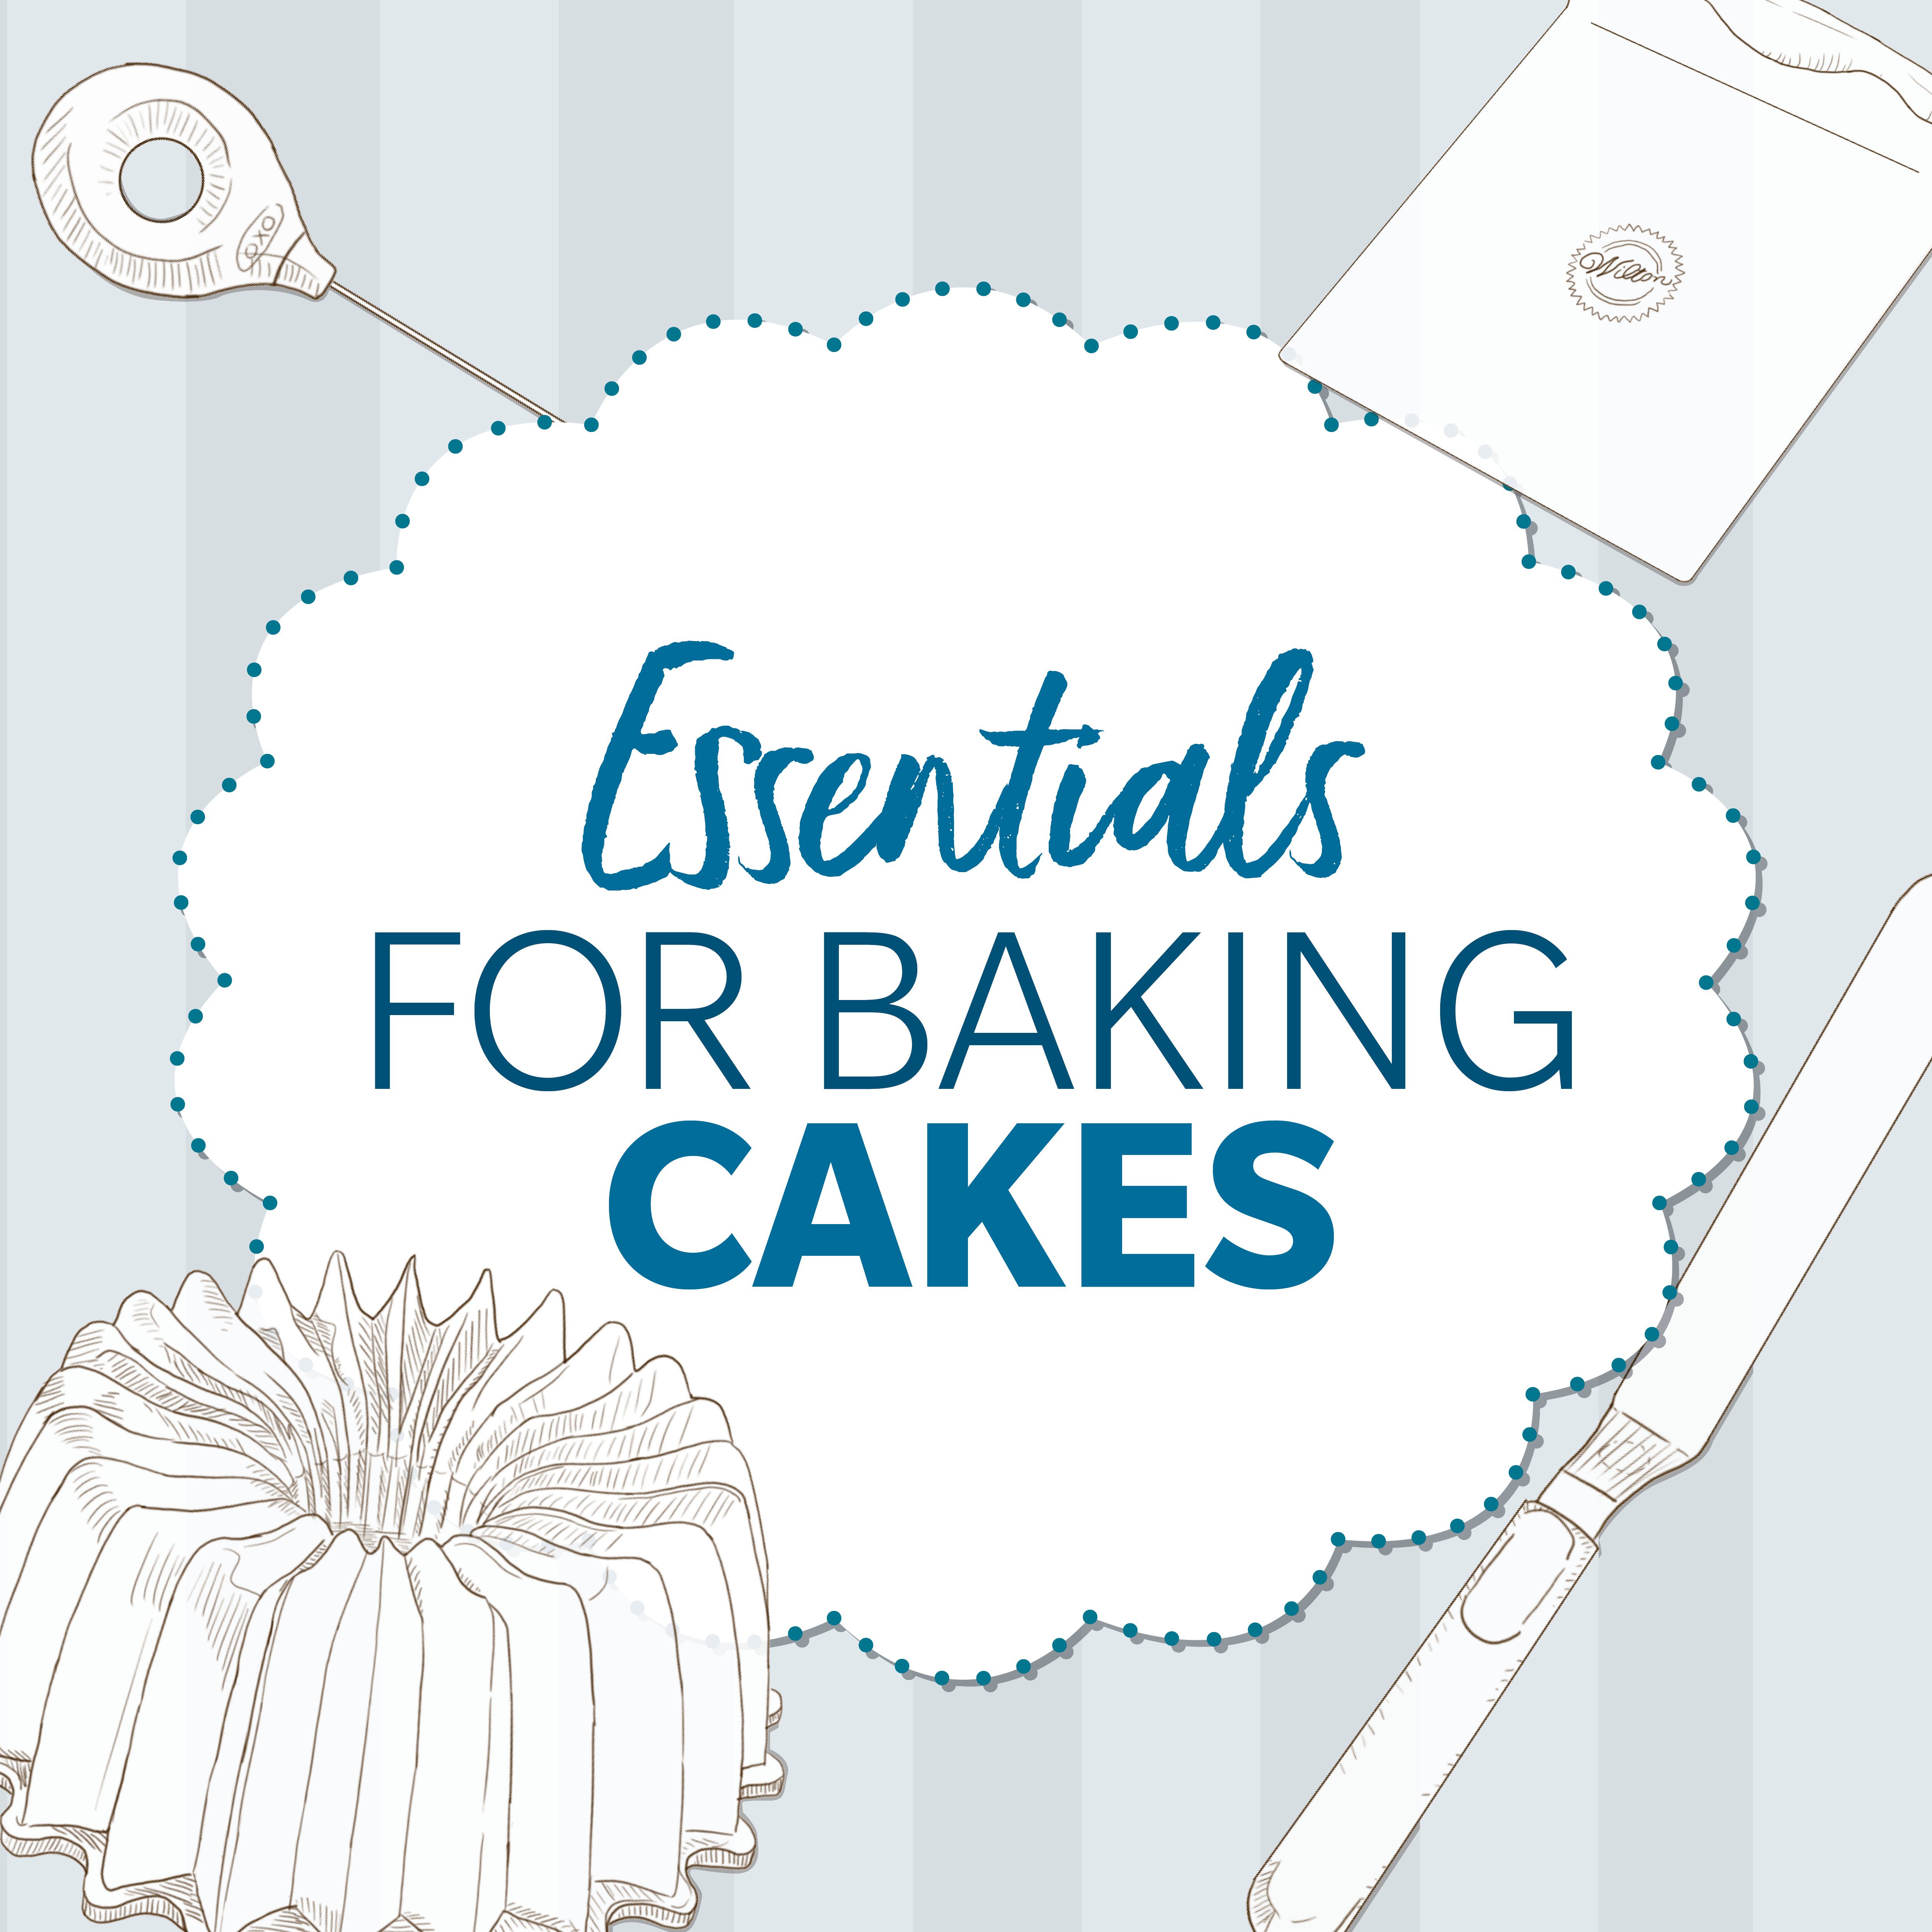 https://www.tasteofhome.com/wp-content/uploads/2019/07/The-Essential-Cake-Baking-Supplies-Every-Home-Cook-Needs-.jpg